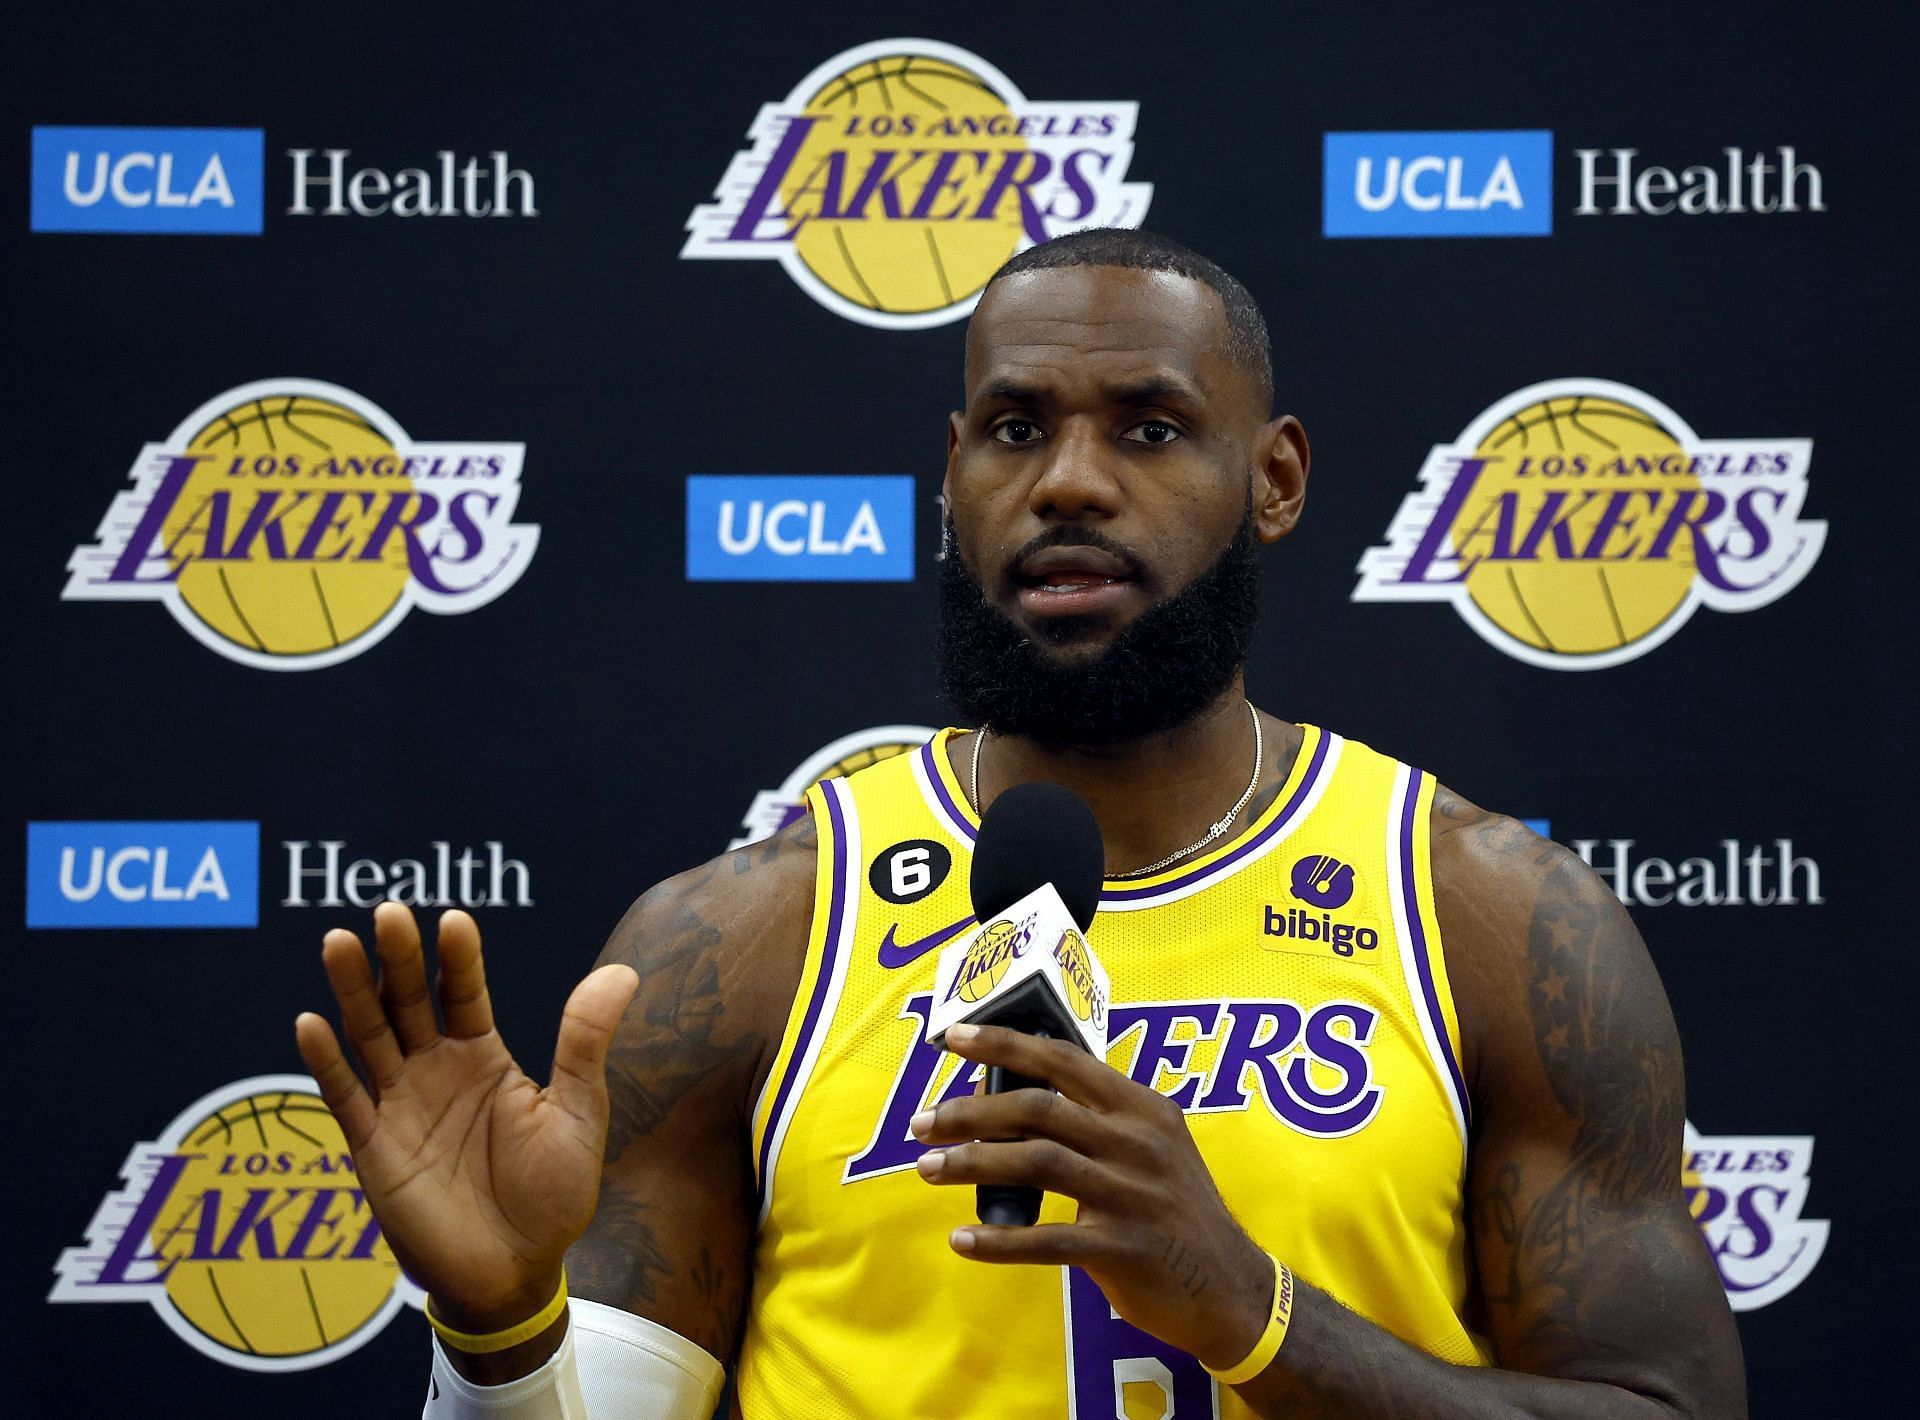 "Really hard to say that because I’m an MJ fan" - Former NBA champion and 4x All-Defensive selection declares LeBron James as the greatest ever